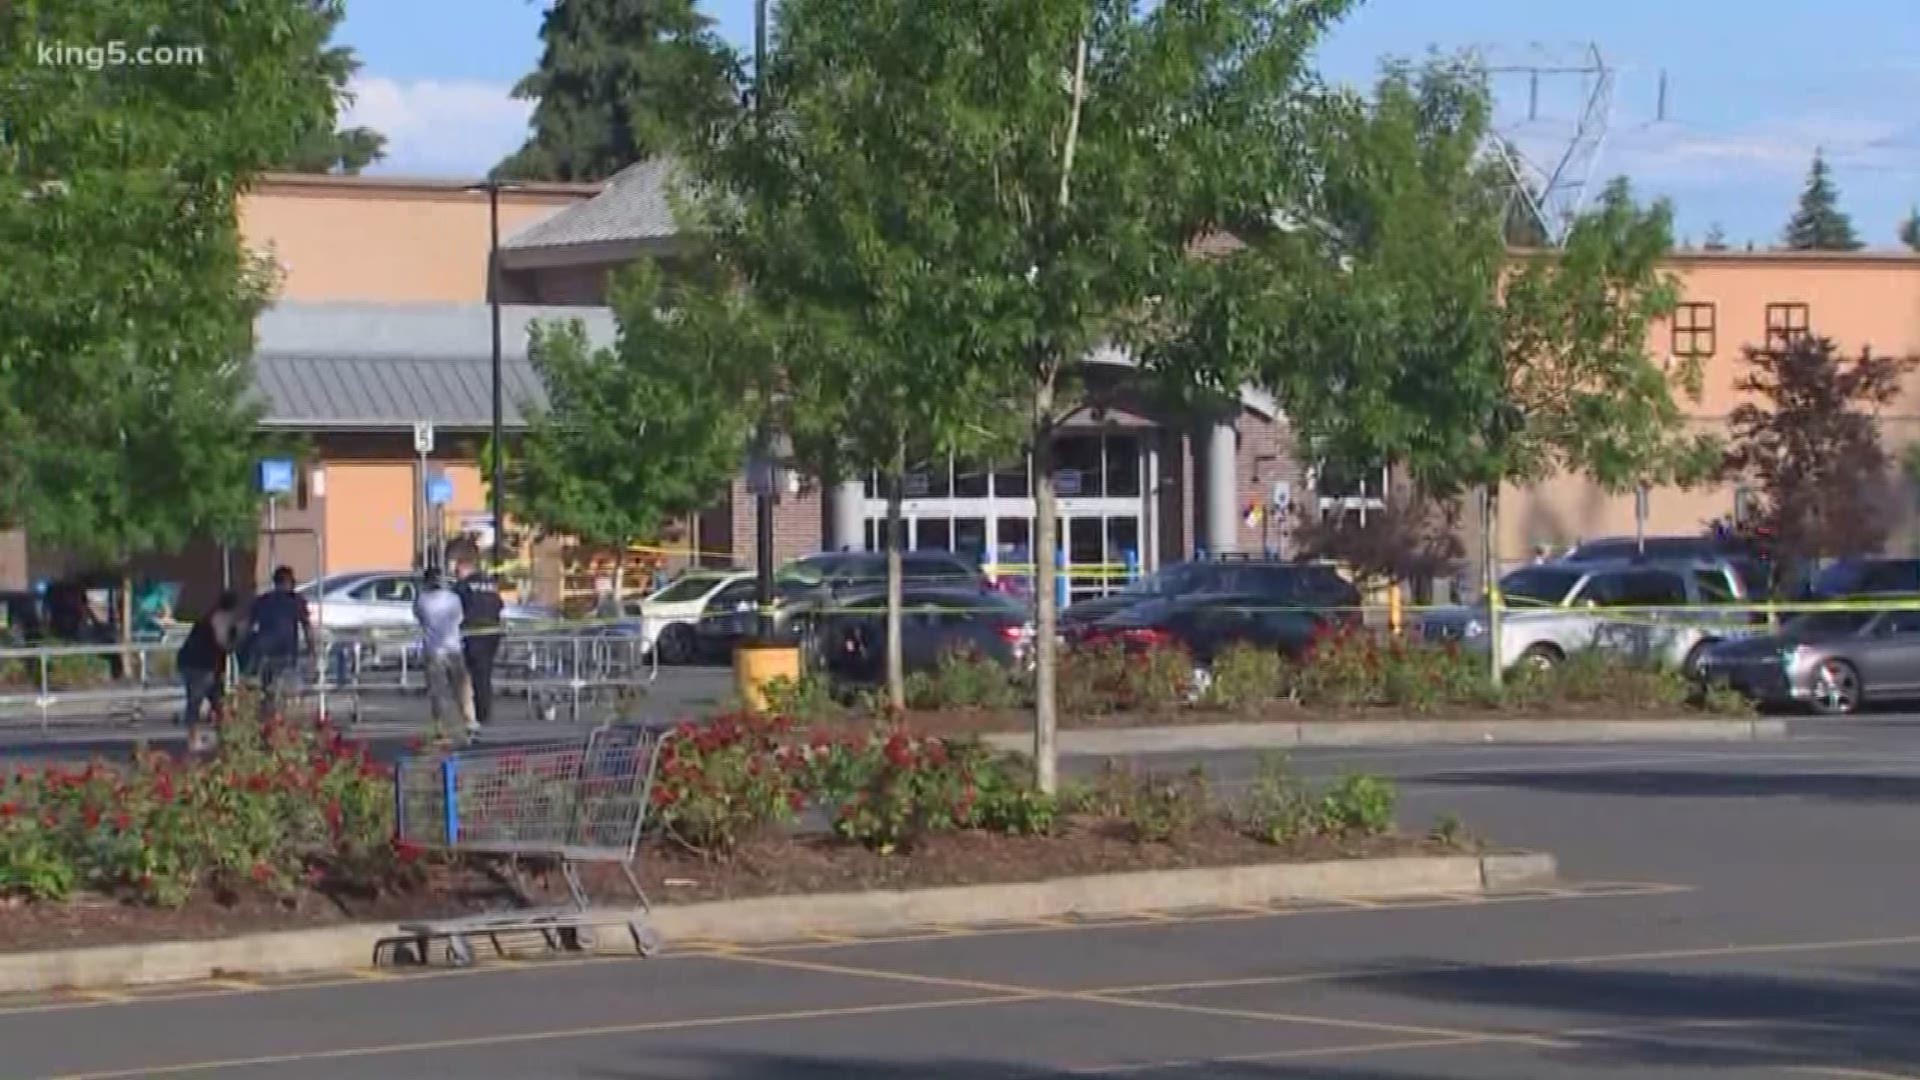 Someone opened fire inside the Walmart in Tumwater, Wash. 